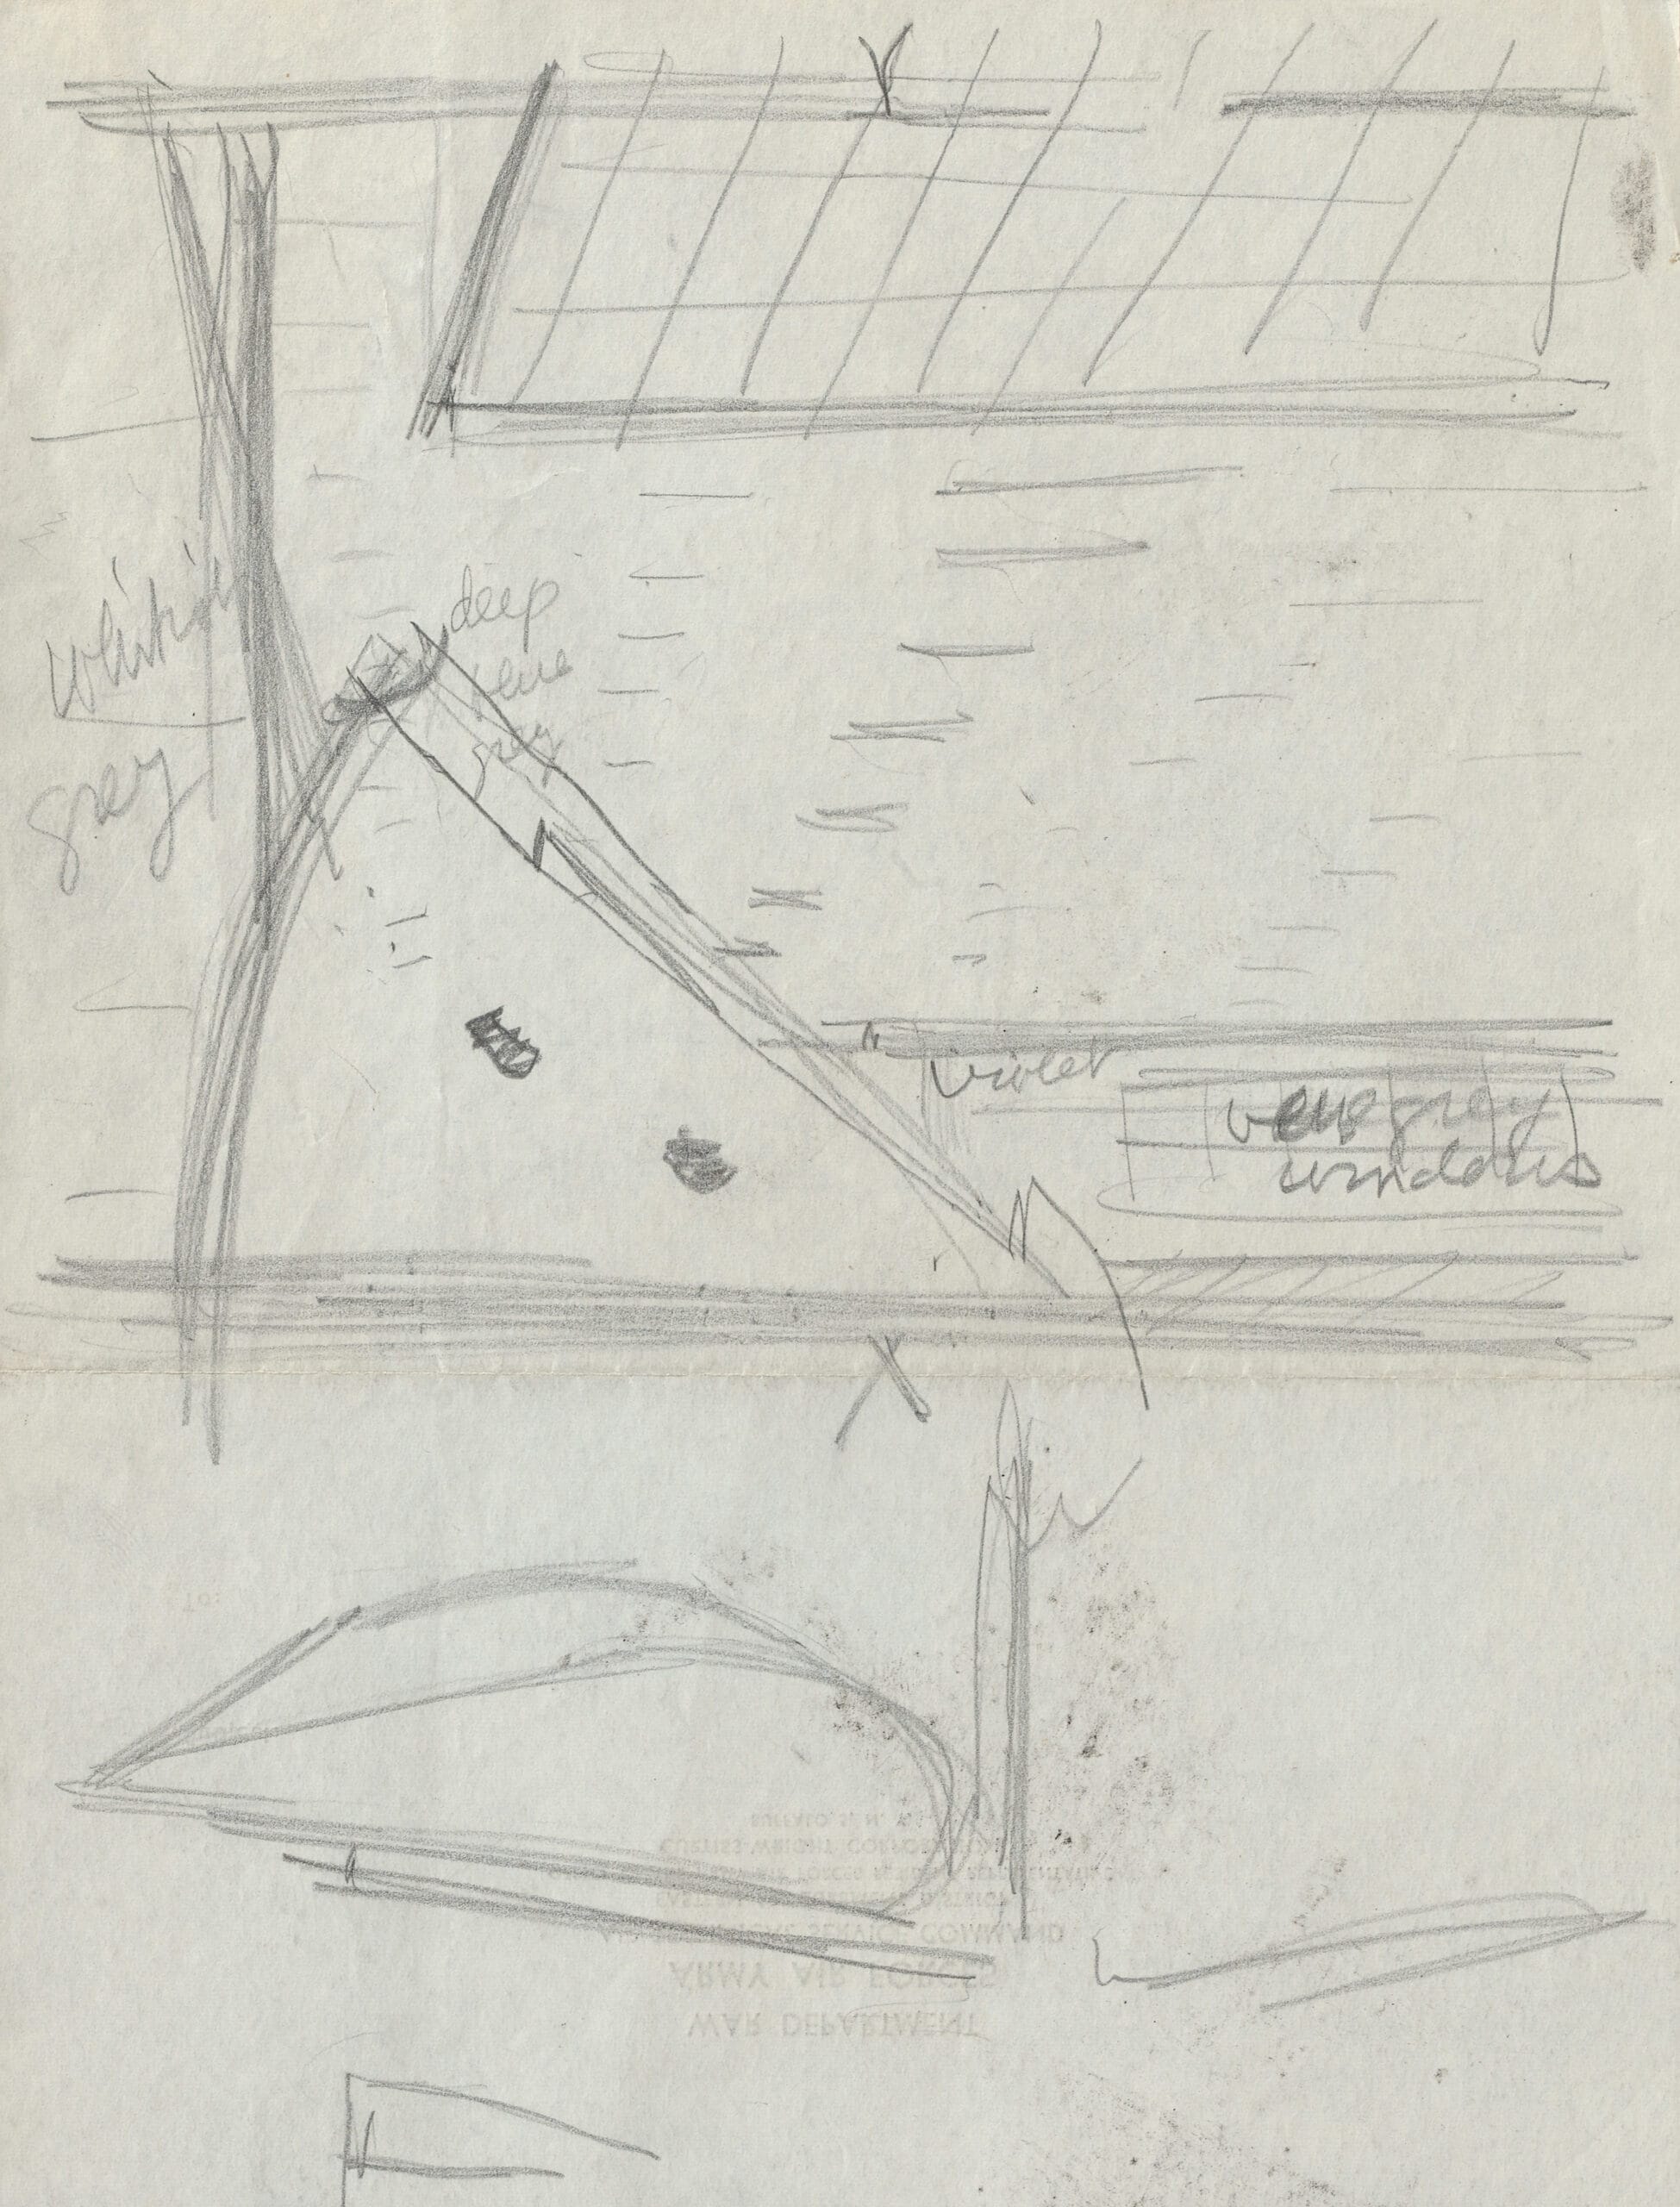 Pencil sketch of an aircraft wing inside a factory with rows of overhead lights.